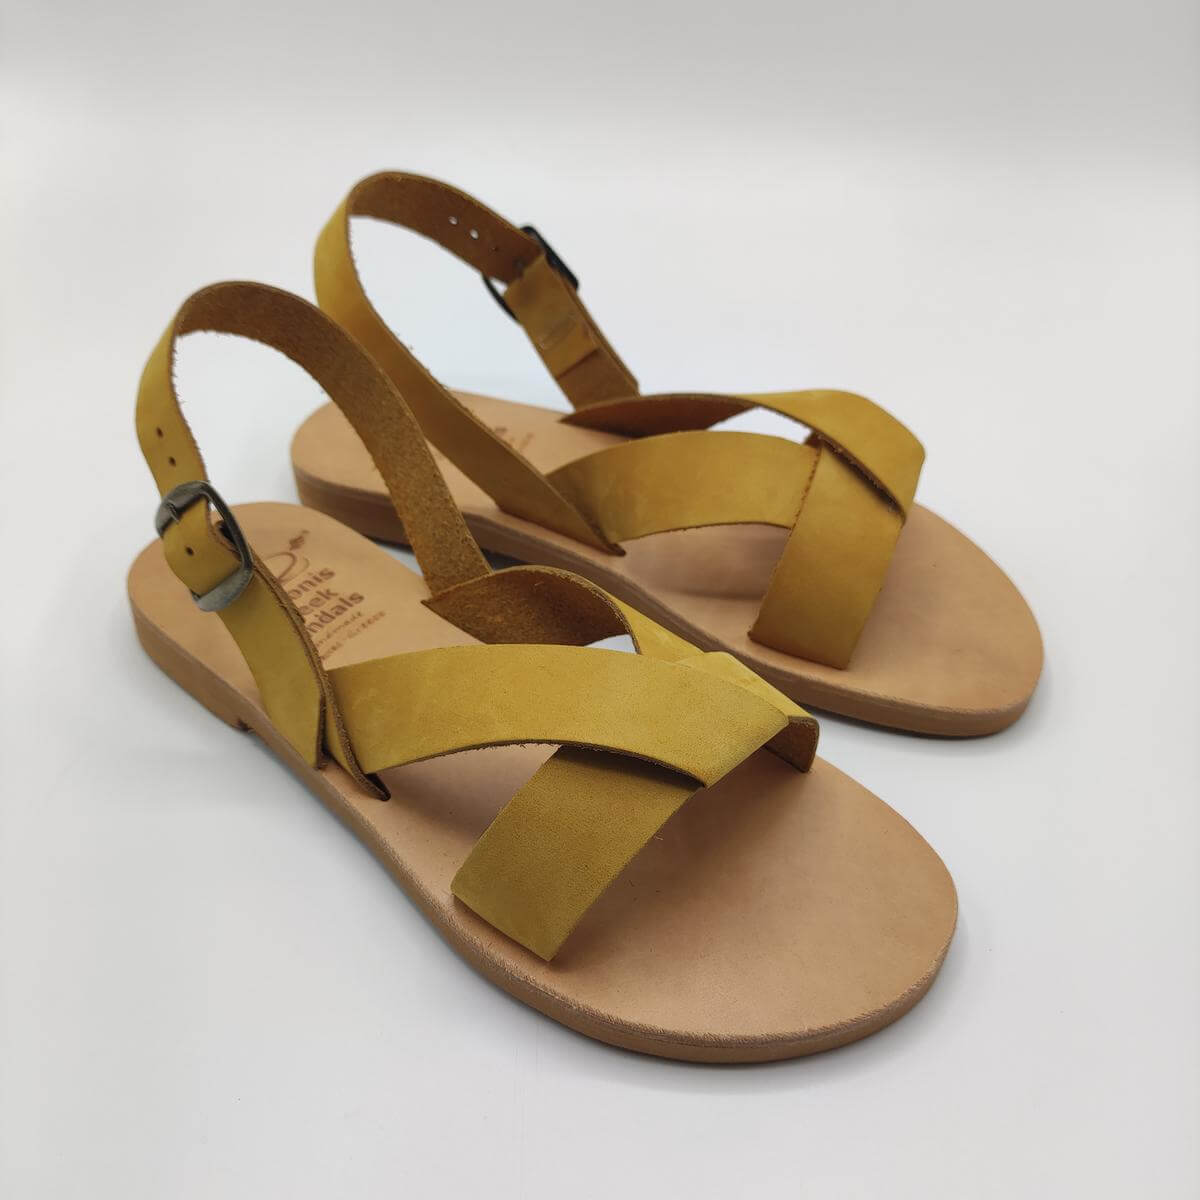 New Age Leather Sandal for Women Ochra Color